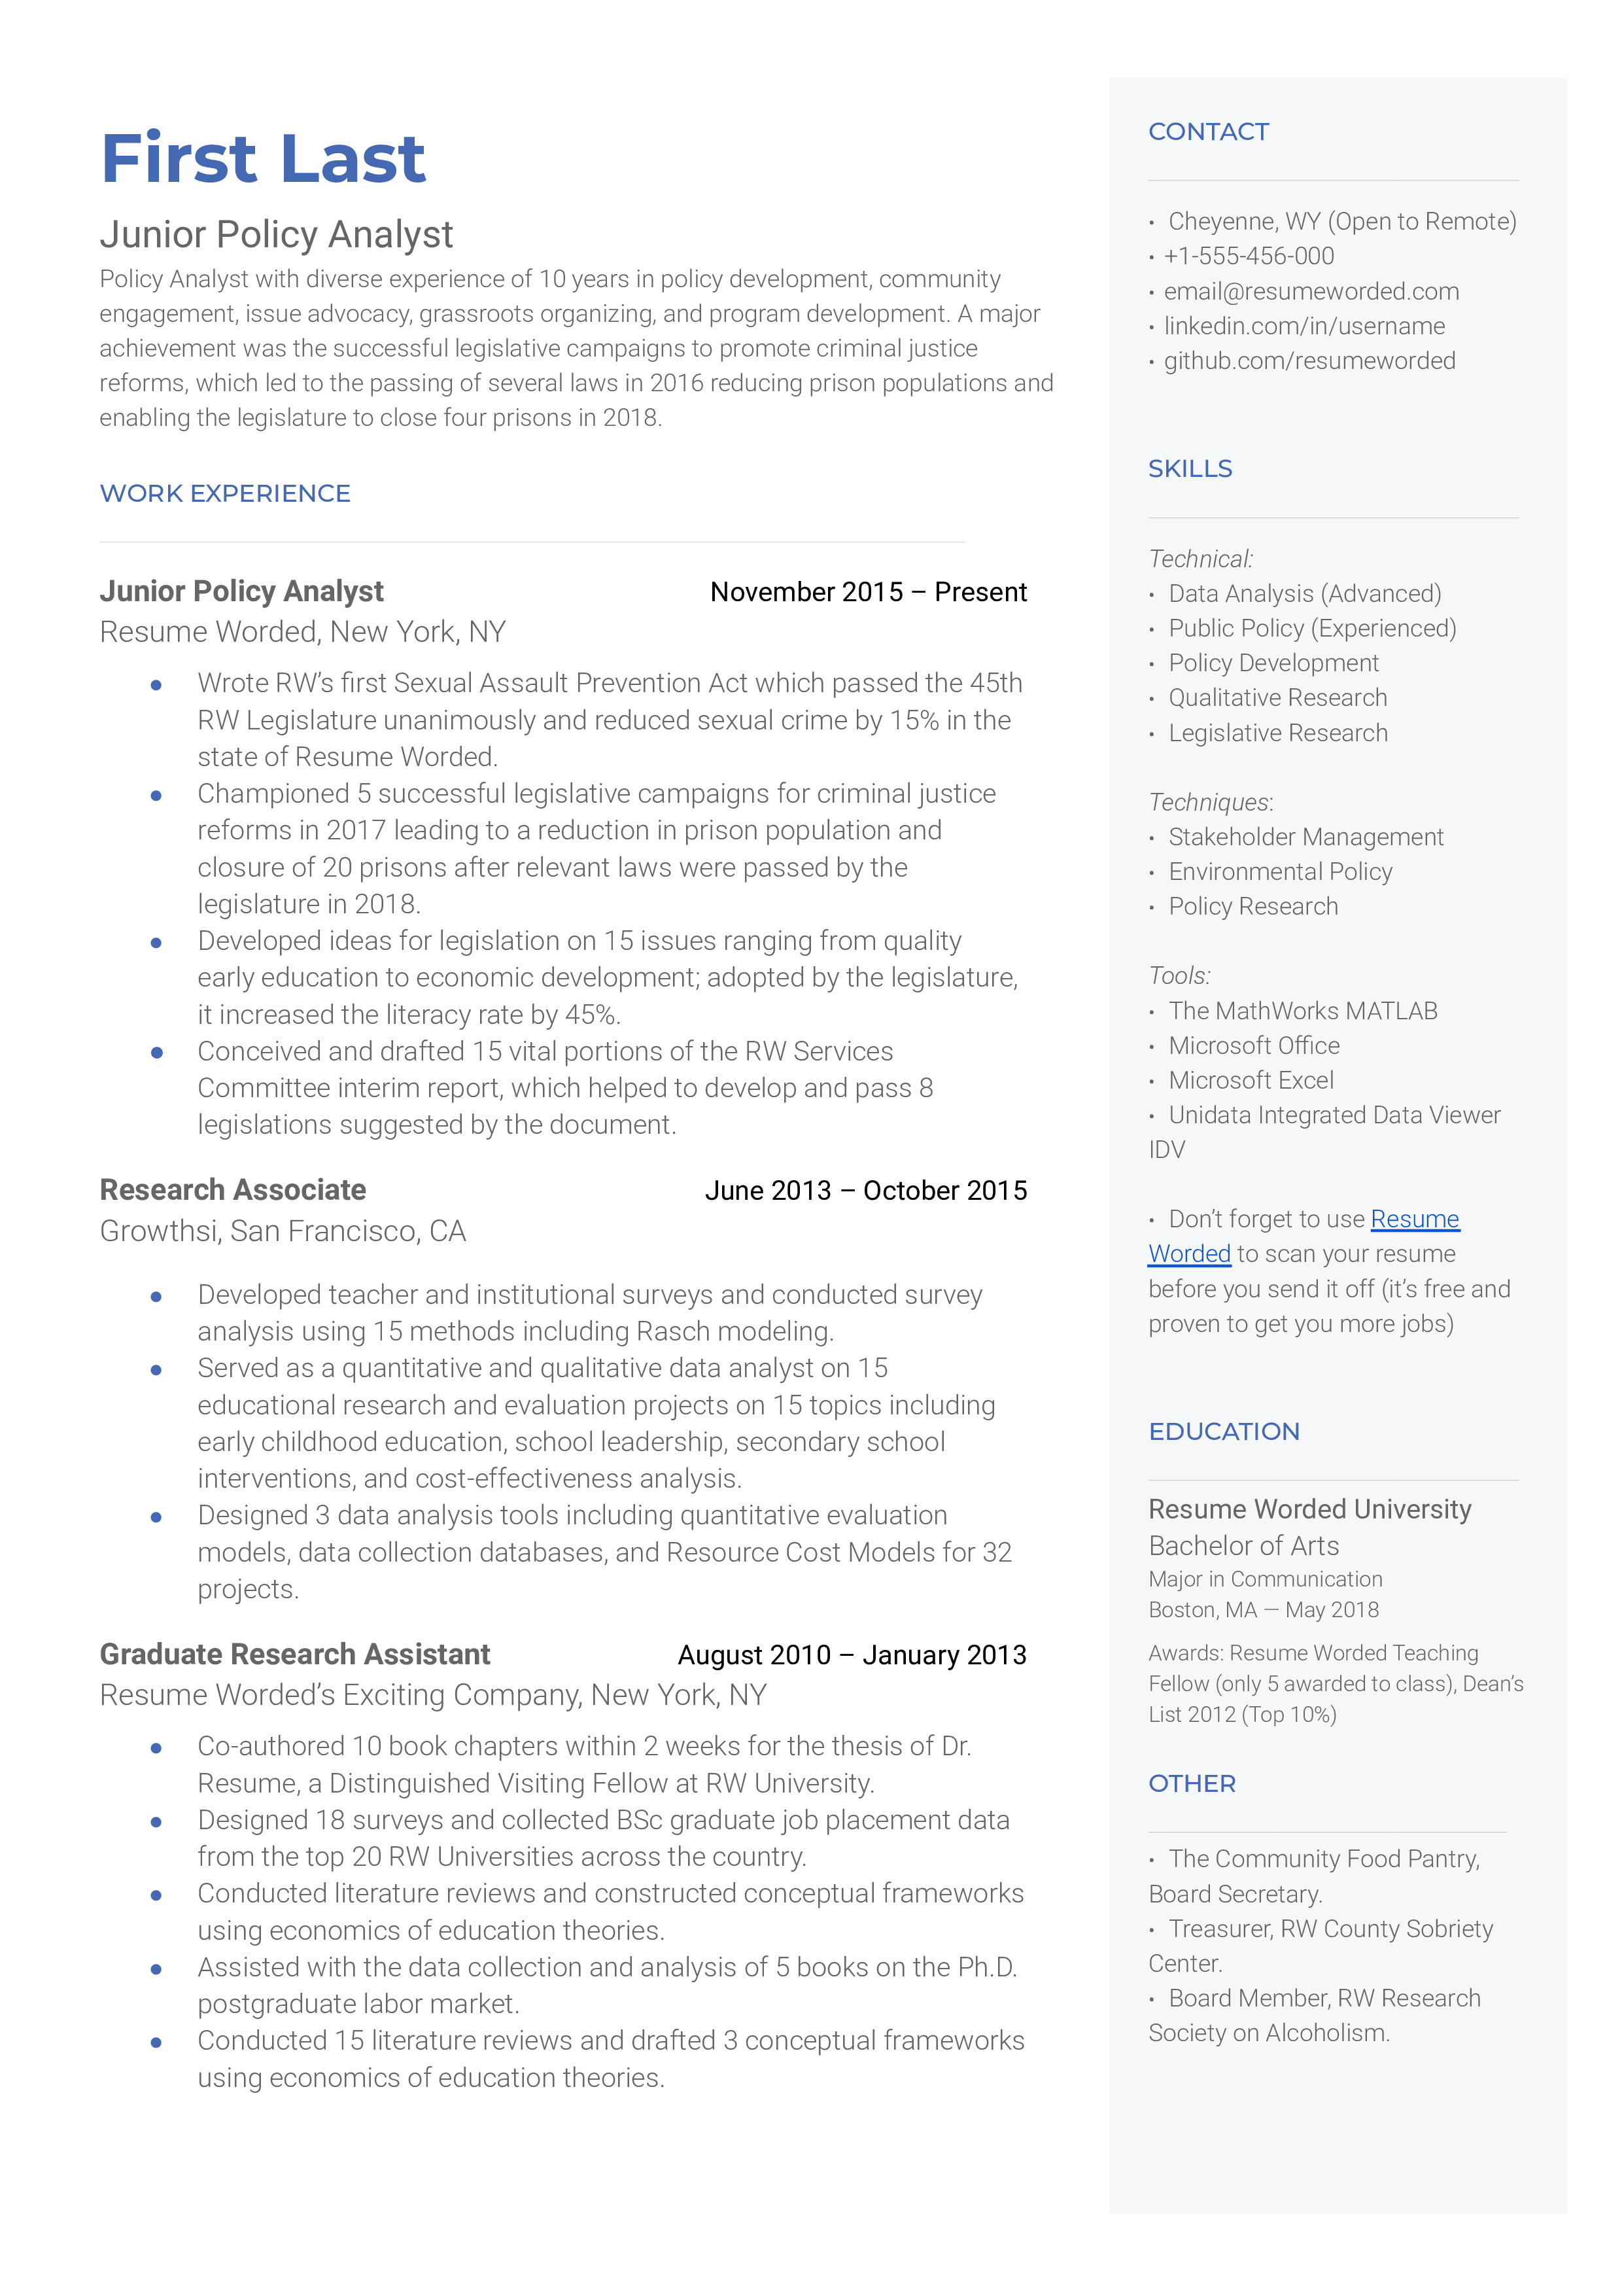 Junior policy analyst resume sample that highlights the applicant's specialized skills and includes their university experience